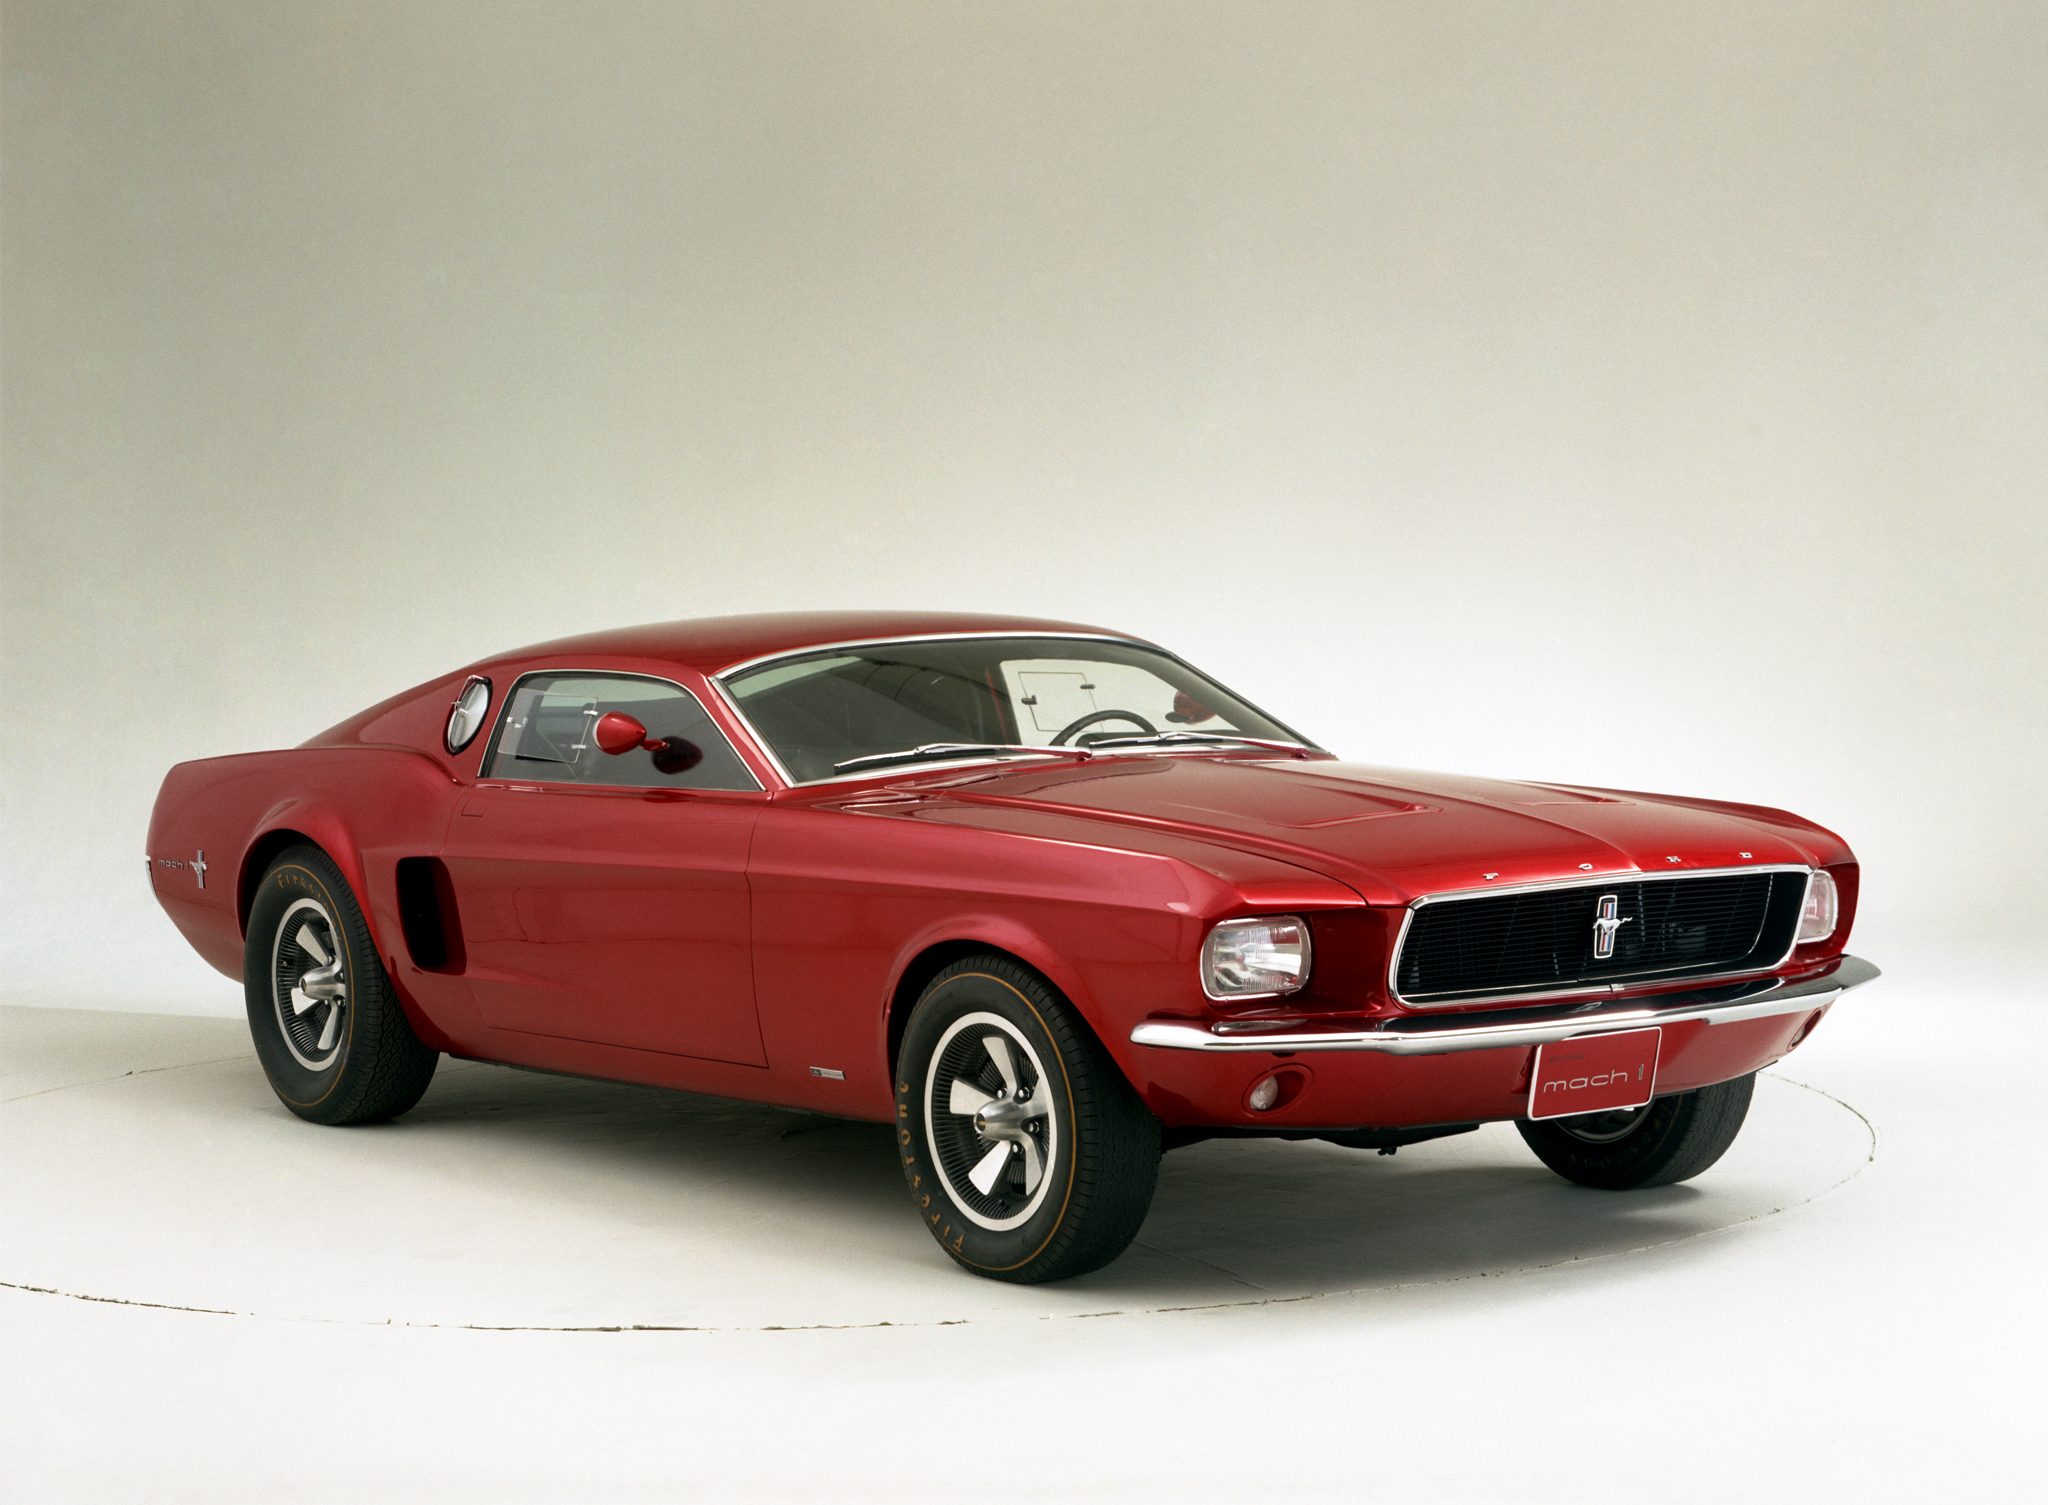 Mustang Of The Day: 1966 Mustang Mach 1 Prototype